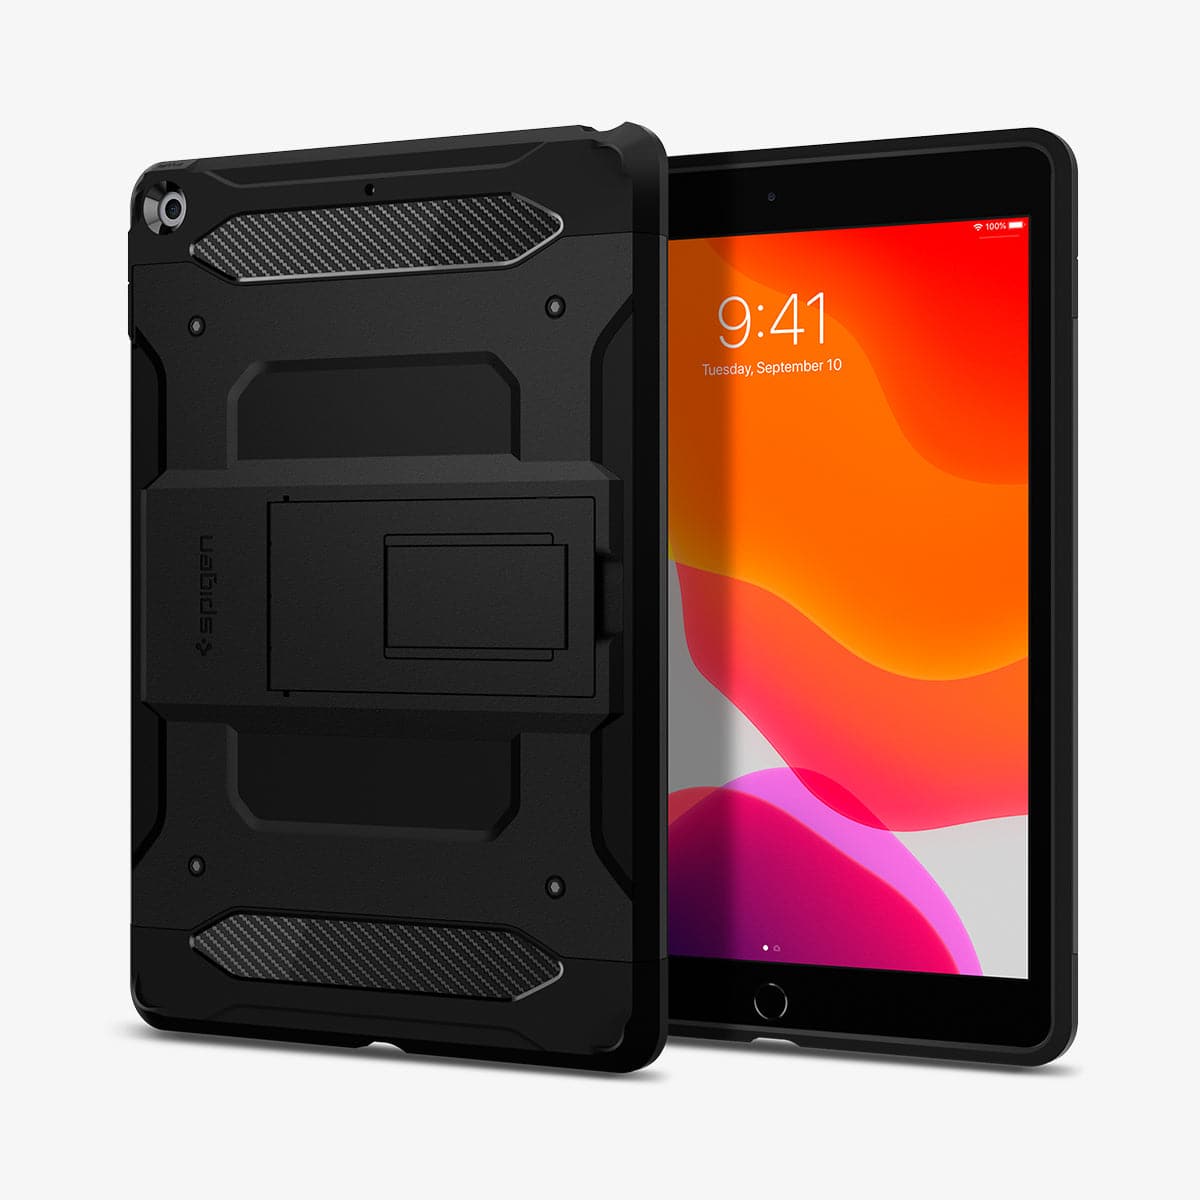 ACS00377 - iPad 10.2" Case Tough Armor Tech in black showing the back and front